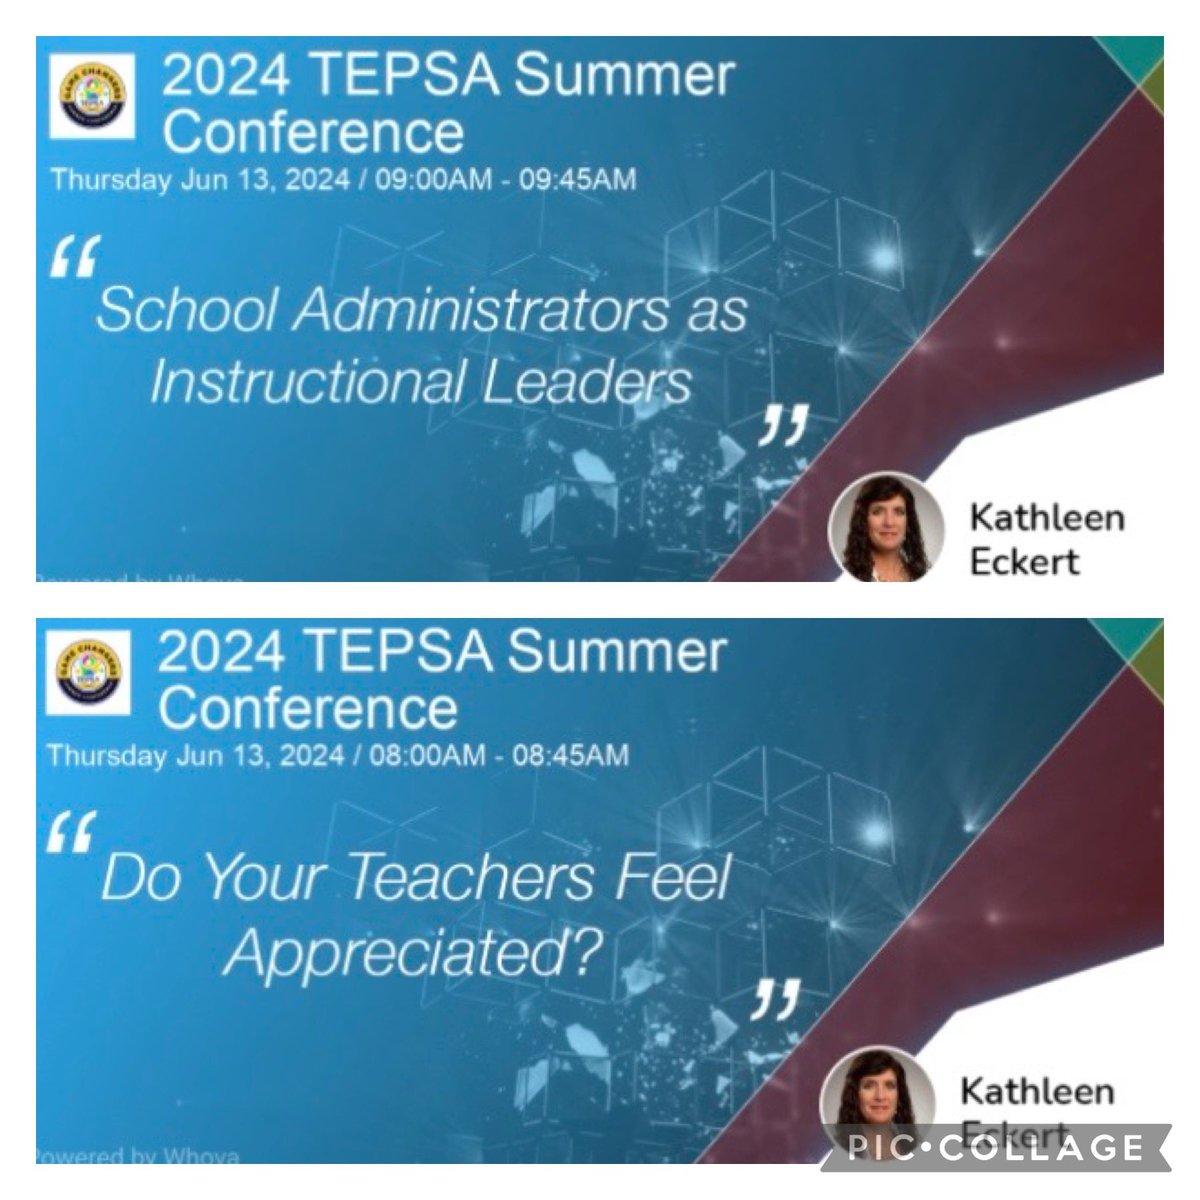 I am excited to be presenting at TEPSA in a few weeks! @TEPSAtalk